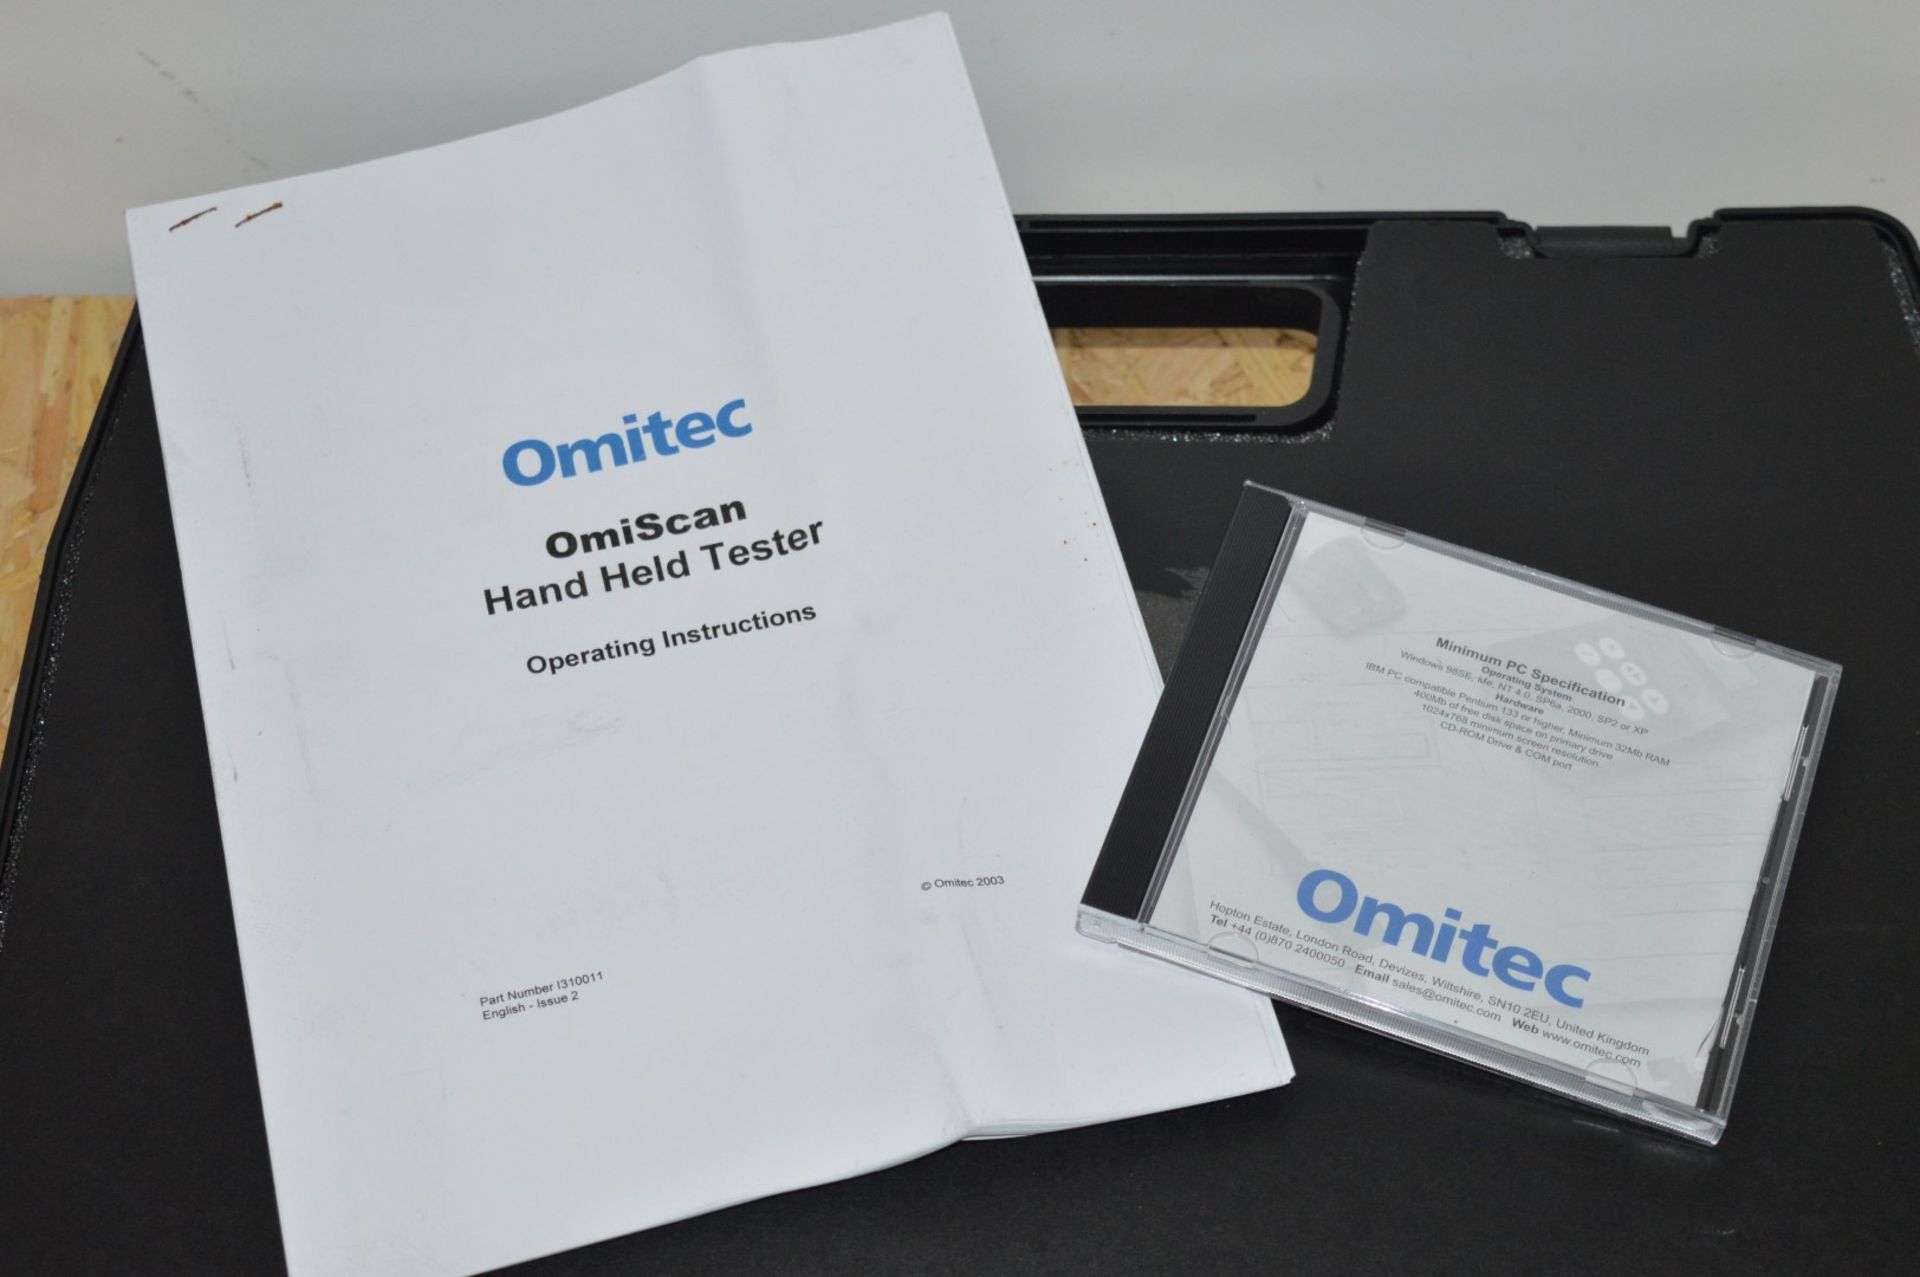 1 x Omitec OmiScan Automotive Diagnostic Tool - Model OM100/1 - Includes Carry Case, User Manual, - Image 4 of 7